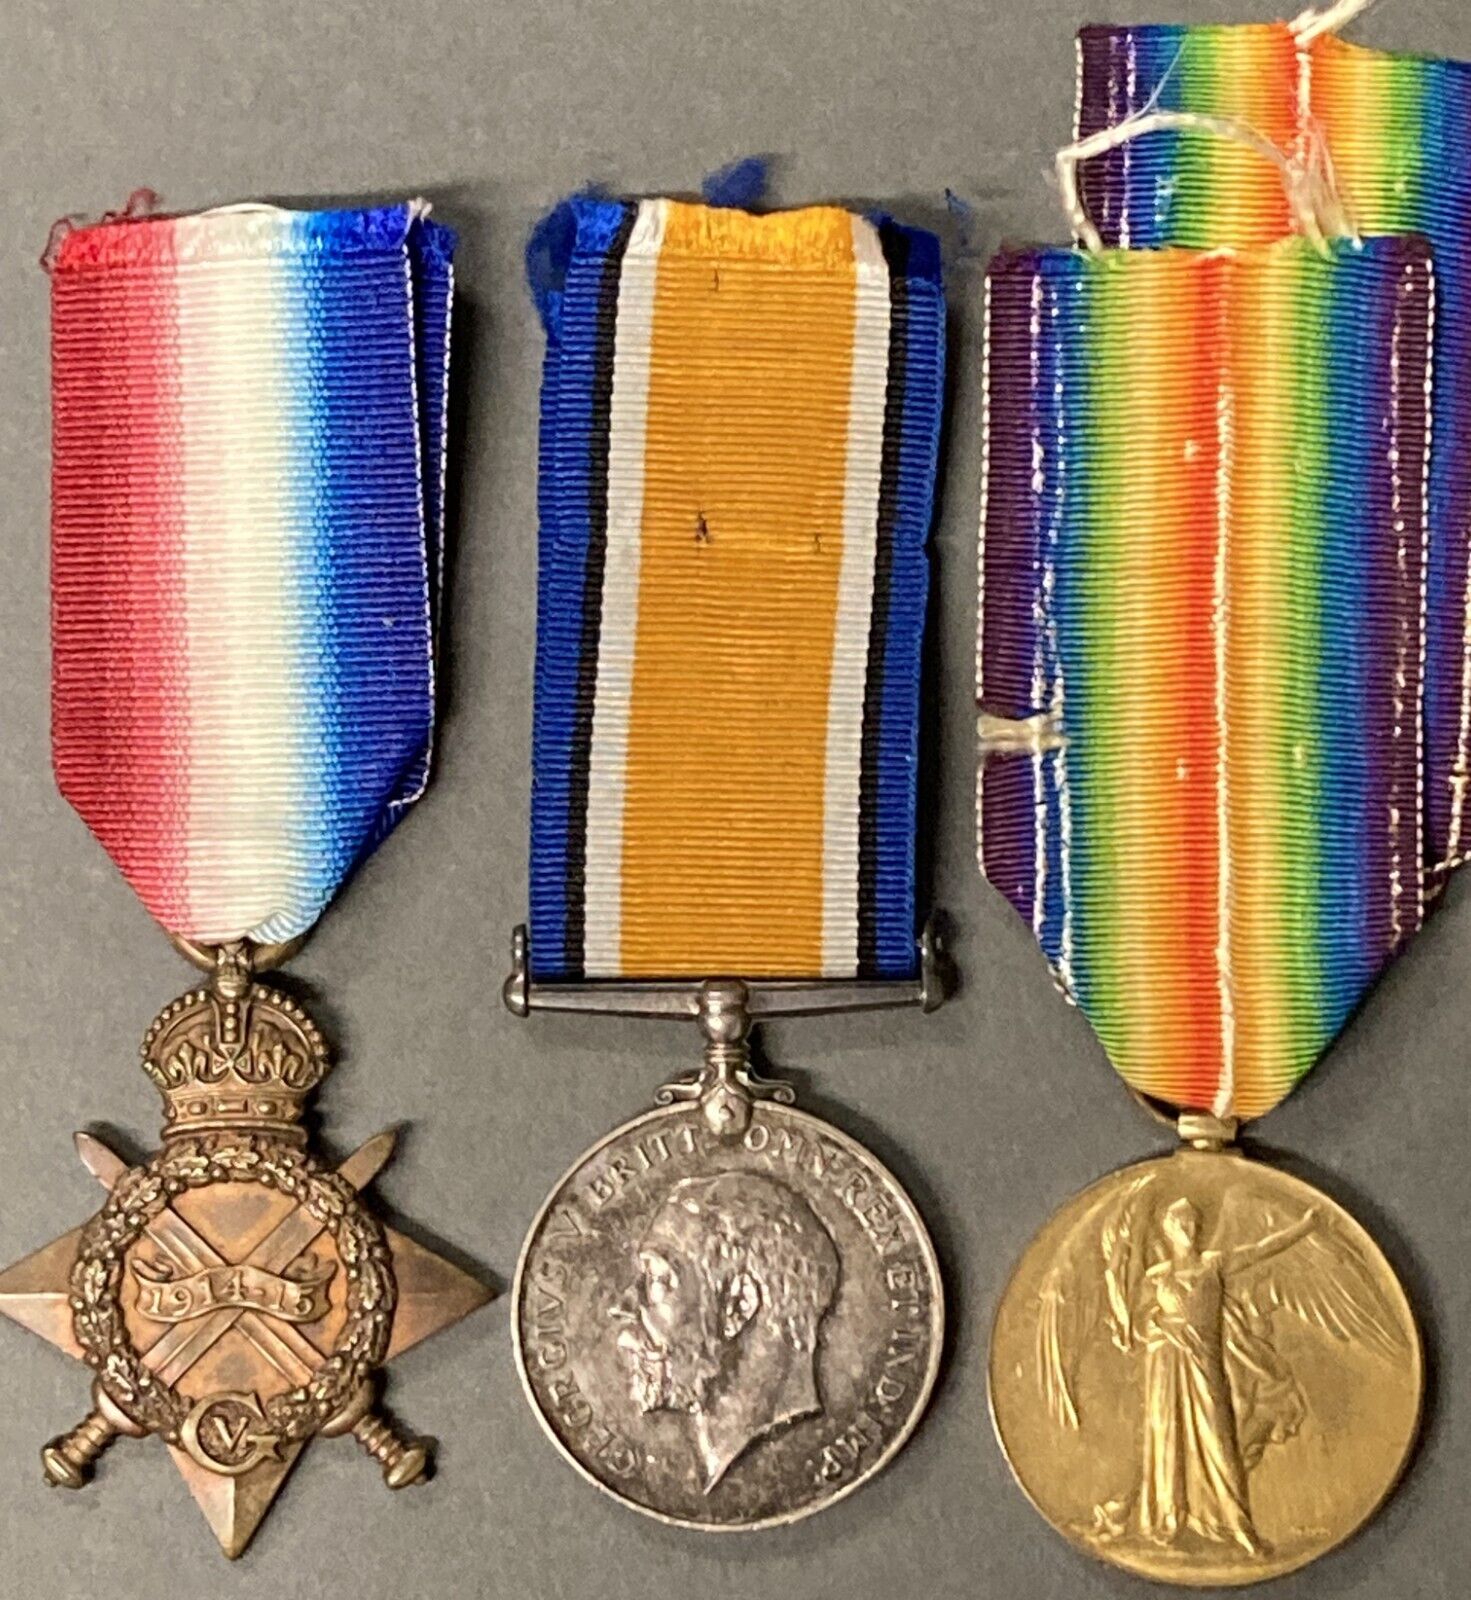 WWI British Medal Group 14-15 Star British War and Victory Medals Named Numbered